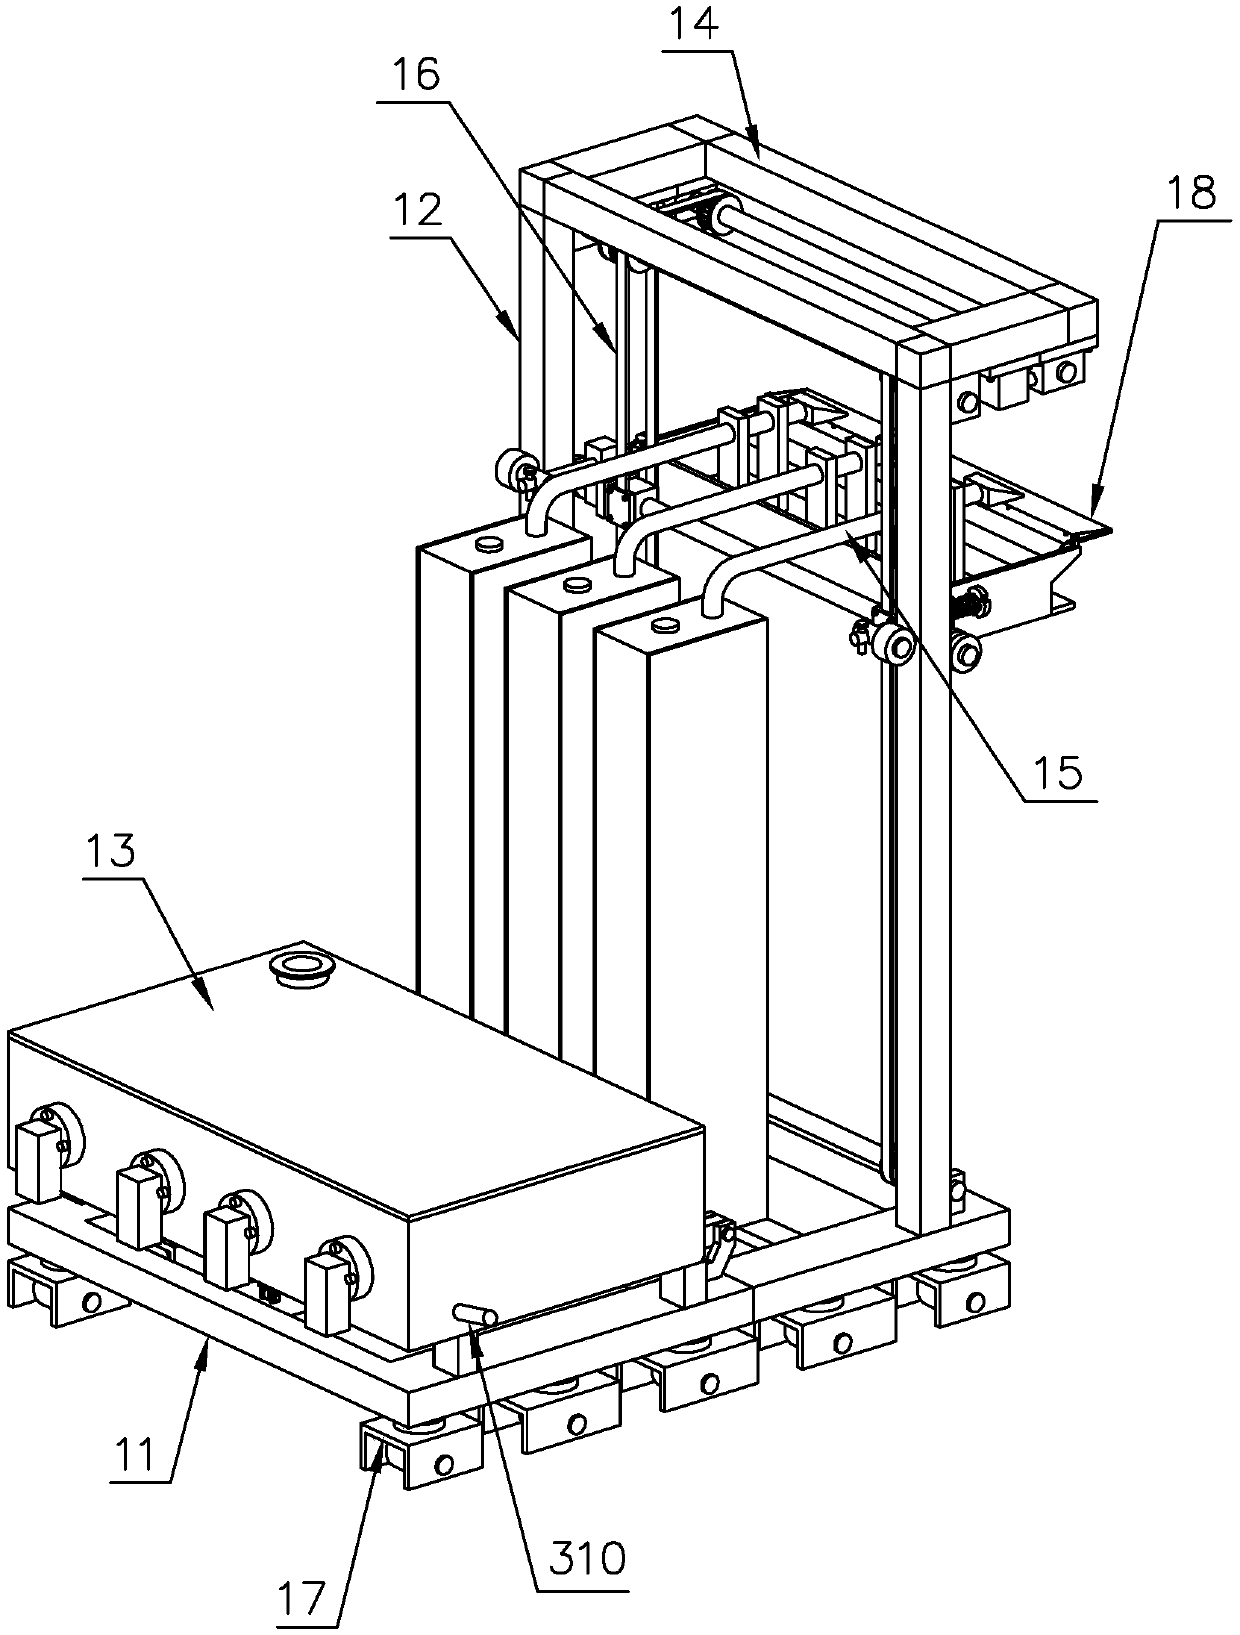 A wall coating and scraping machine for construction